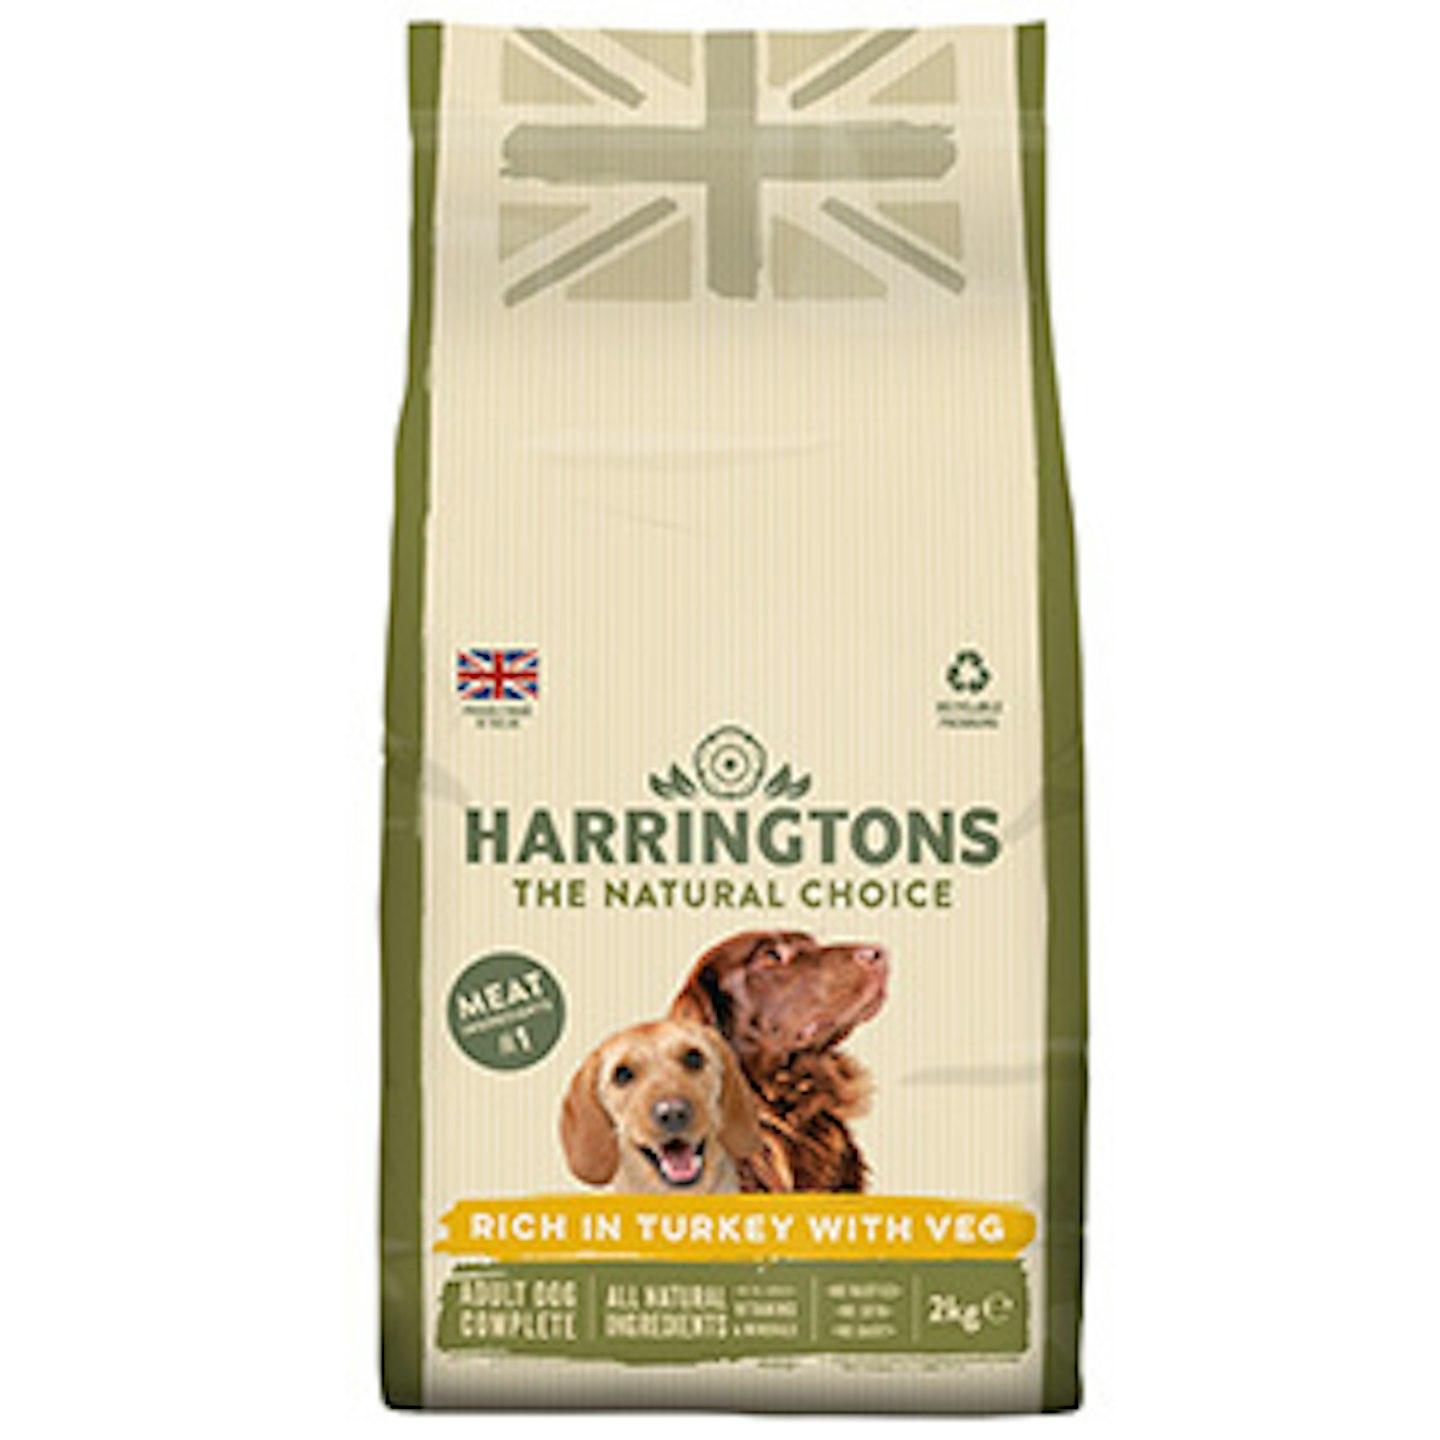 Harringtons Complete Adult Dry Dog Food with Turkey and Veg